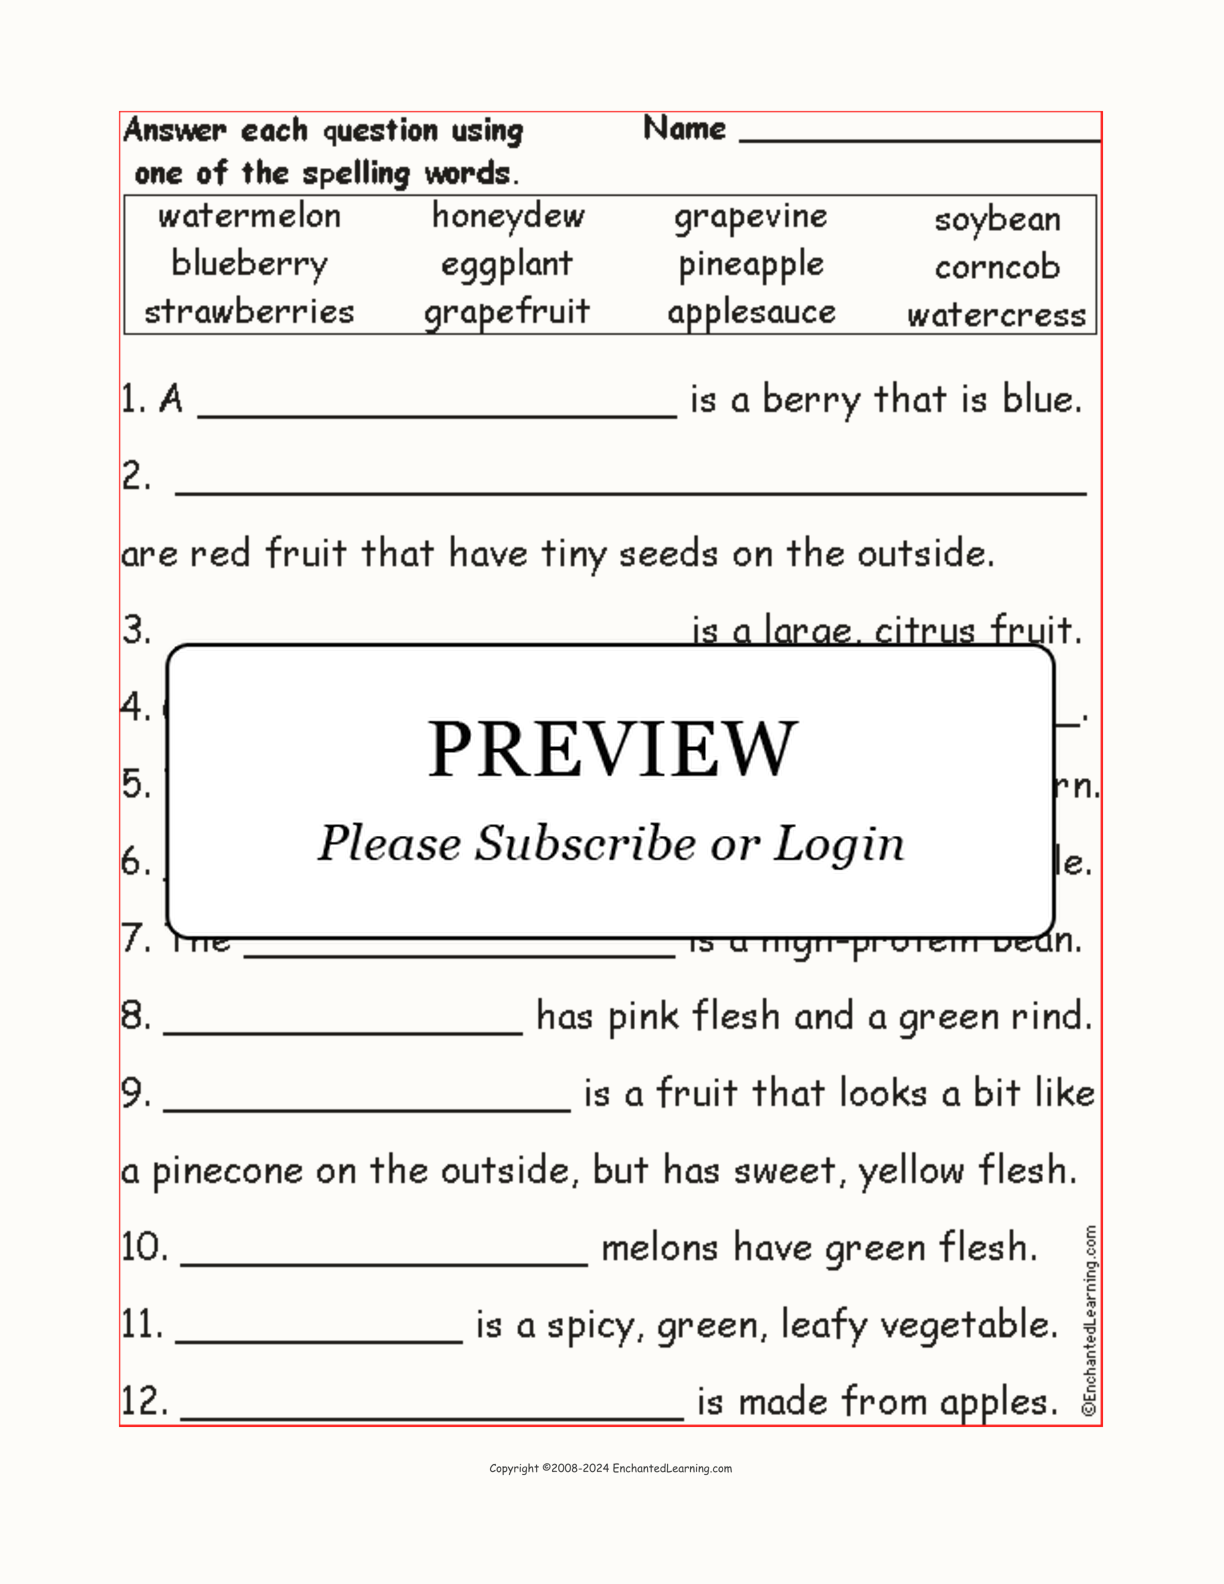 Compound Fruit and Vegetable Words: Spelling Questions interactive worksheet page 1